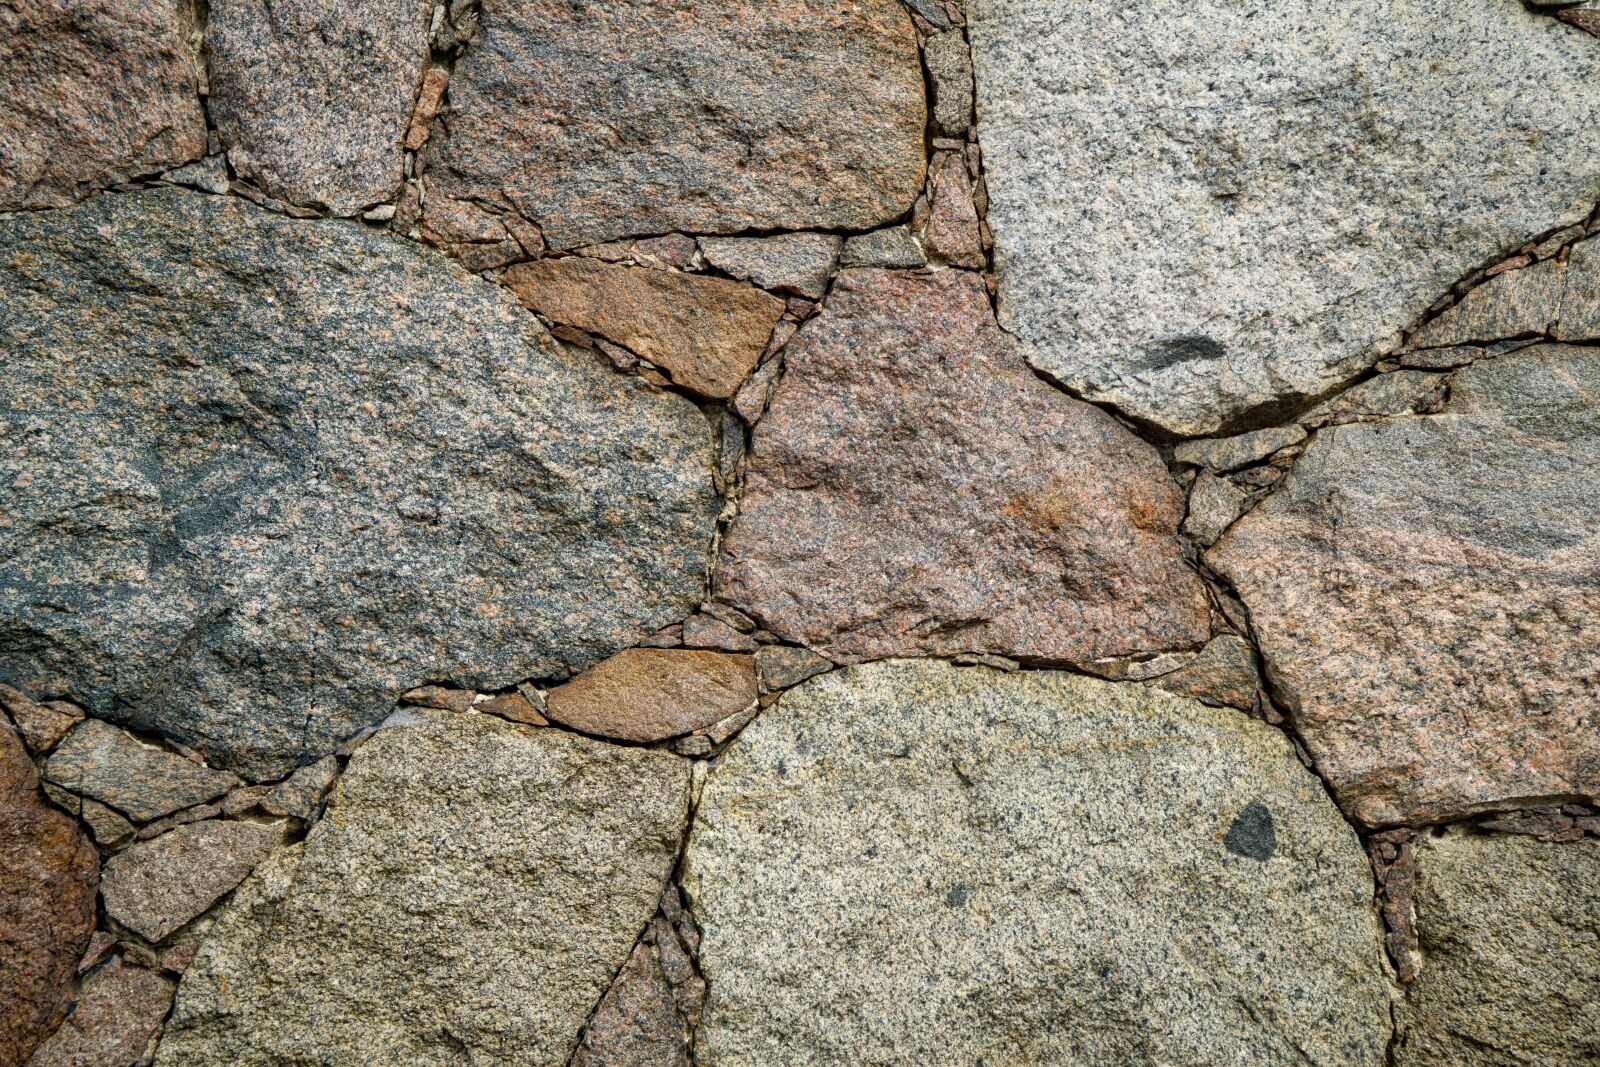 Sony E PZ 18-105mm F4 G OSS sample photo. Field stones, natural stones photography